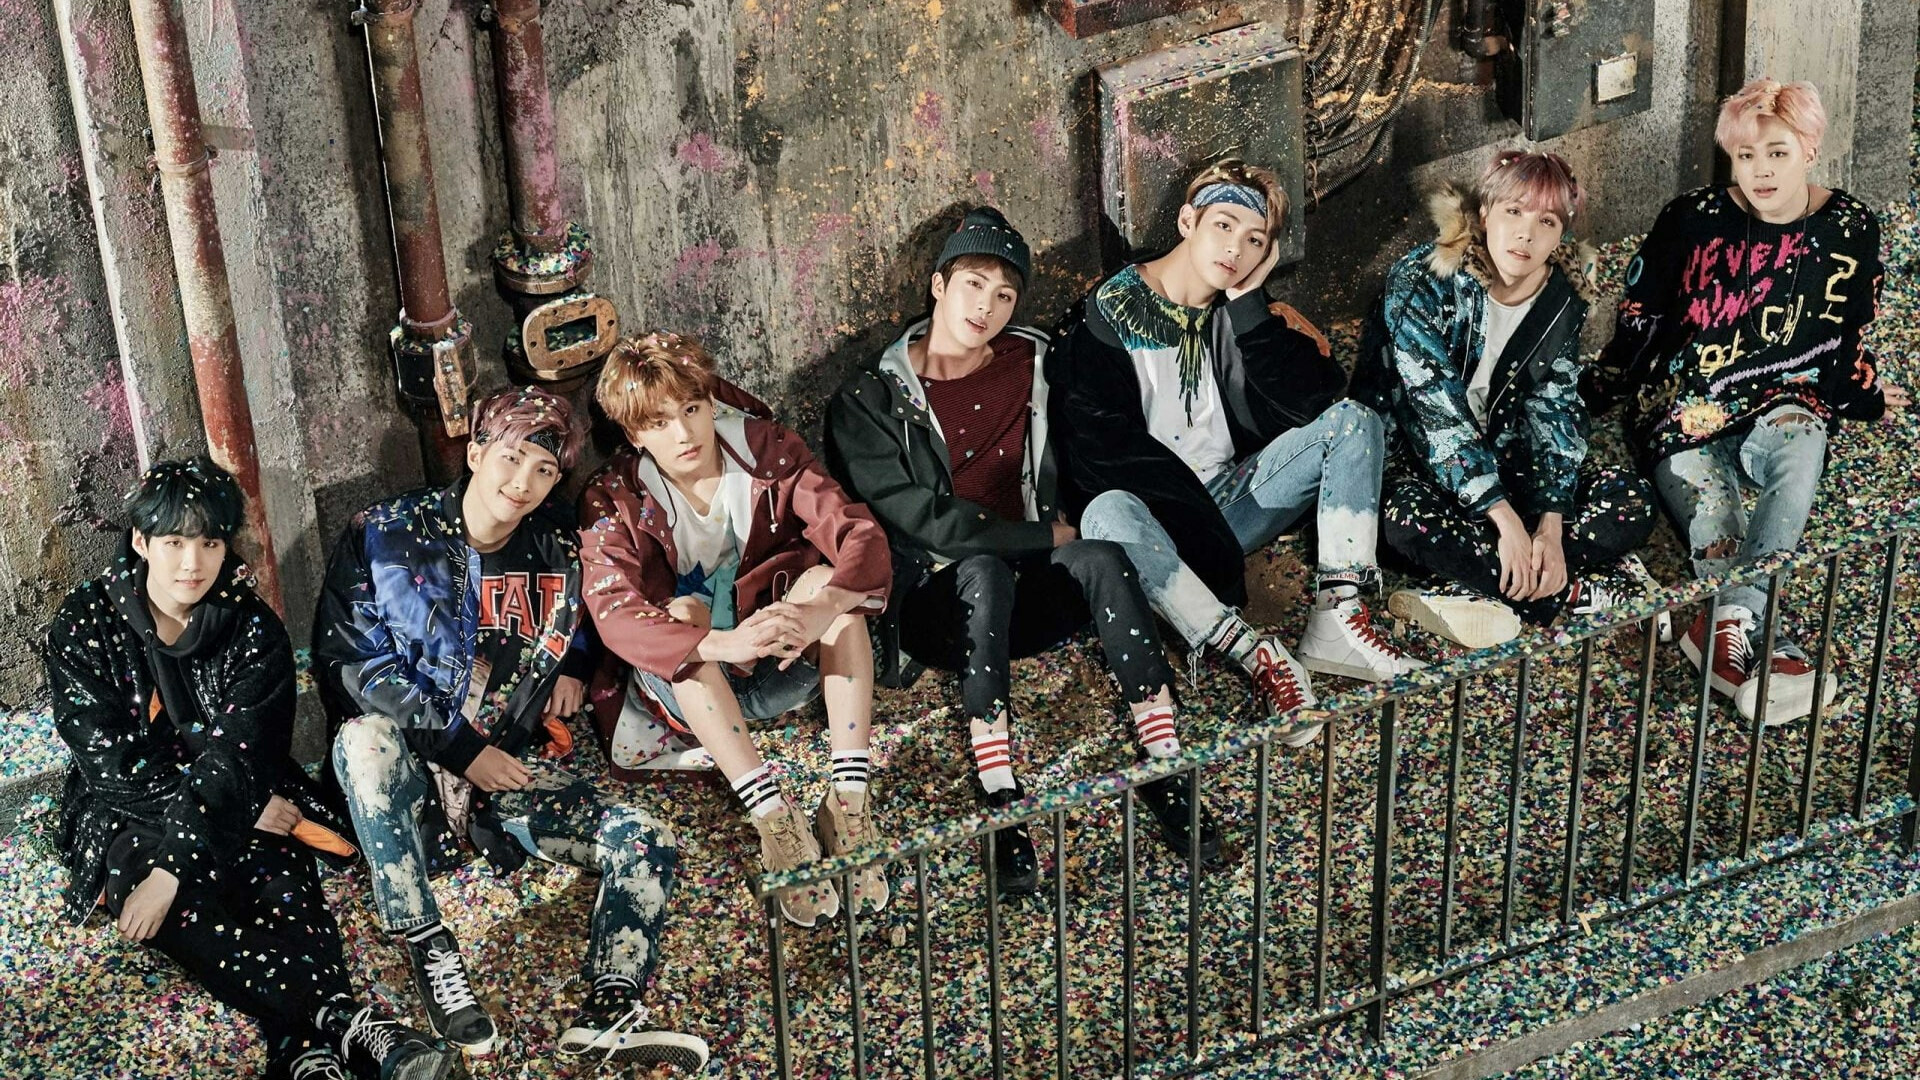 BTS: Music, The band was formed in 2010 under Big Hit Entertainment. 1920x1080 Full HD Wallpaper.